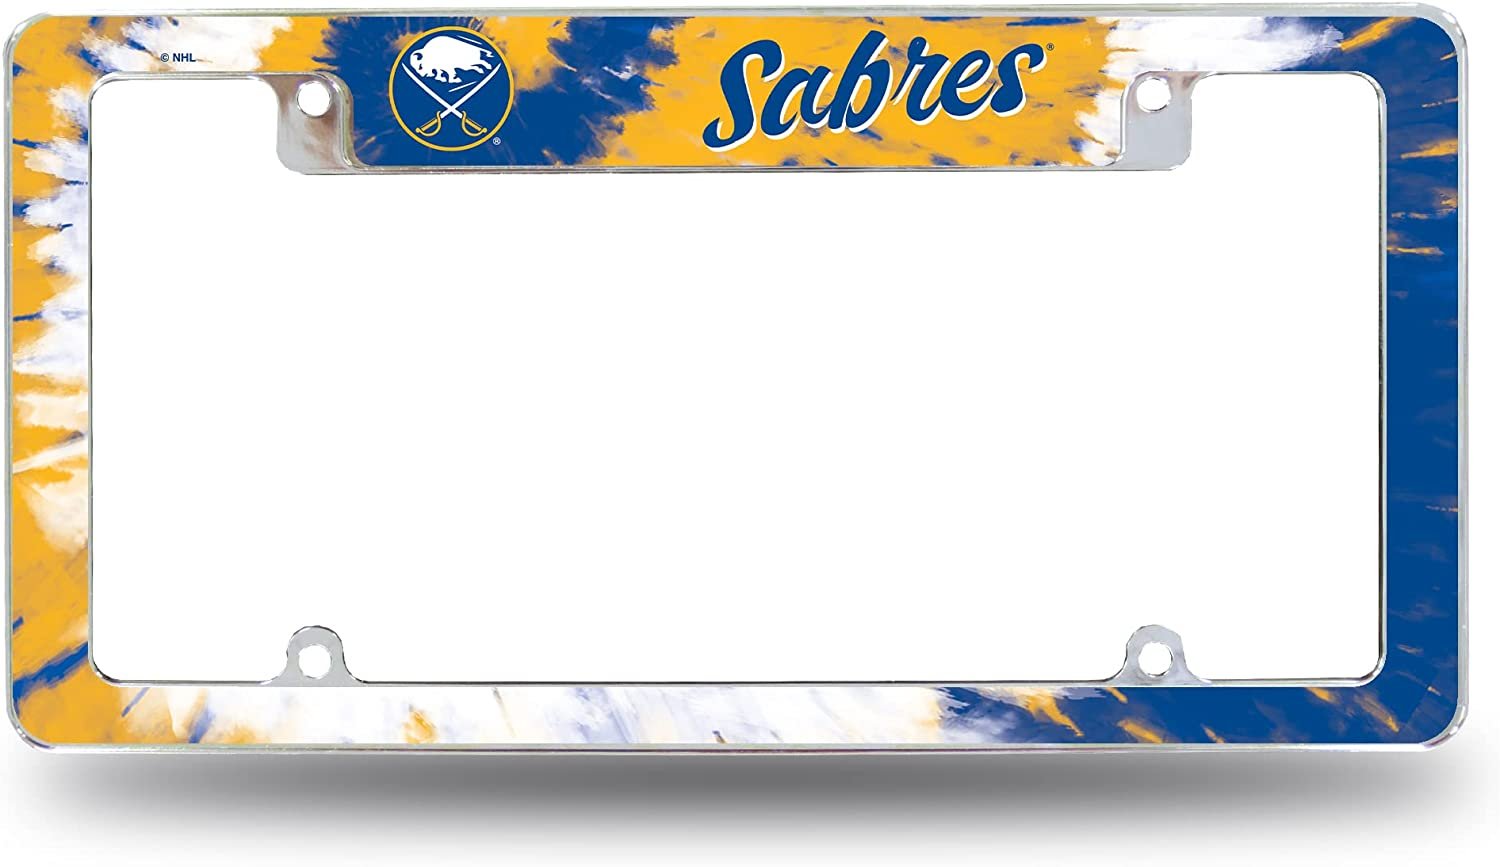 Buffalo Sabres Metal License Plate Frame Chrome Tag Cover Tie Dye Design 6x12 Inch